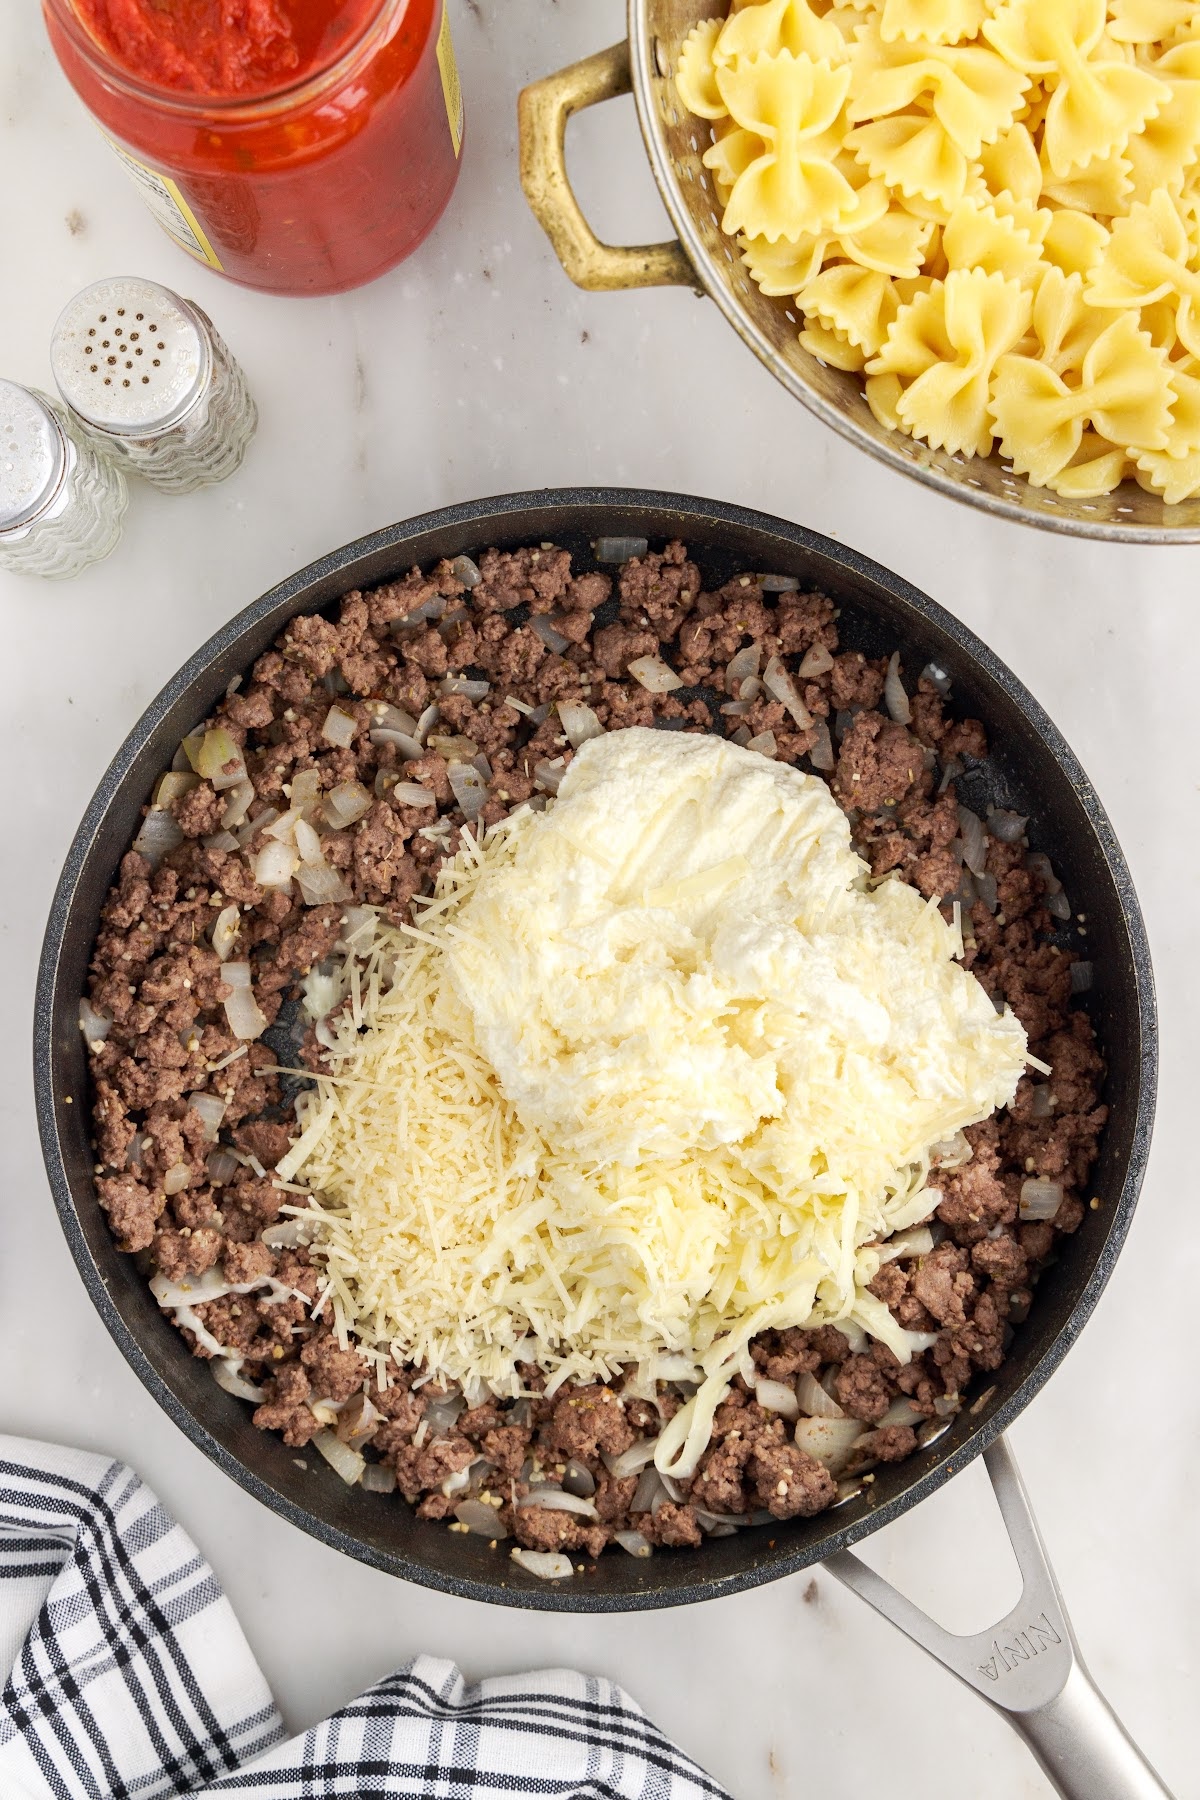 Ricotta and mozzarella cheese added to the ground beef mixture.